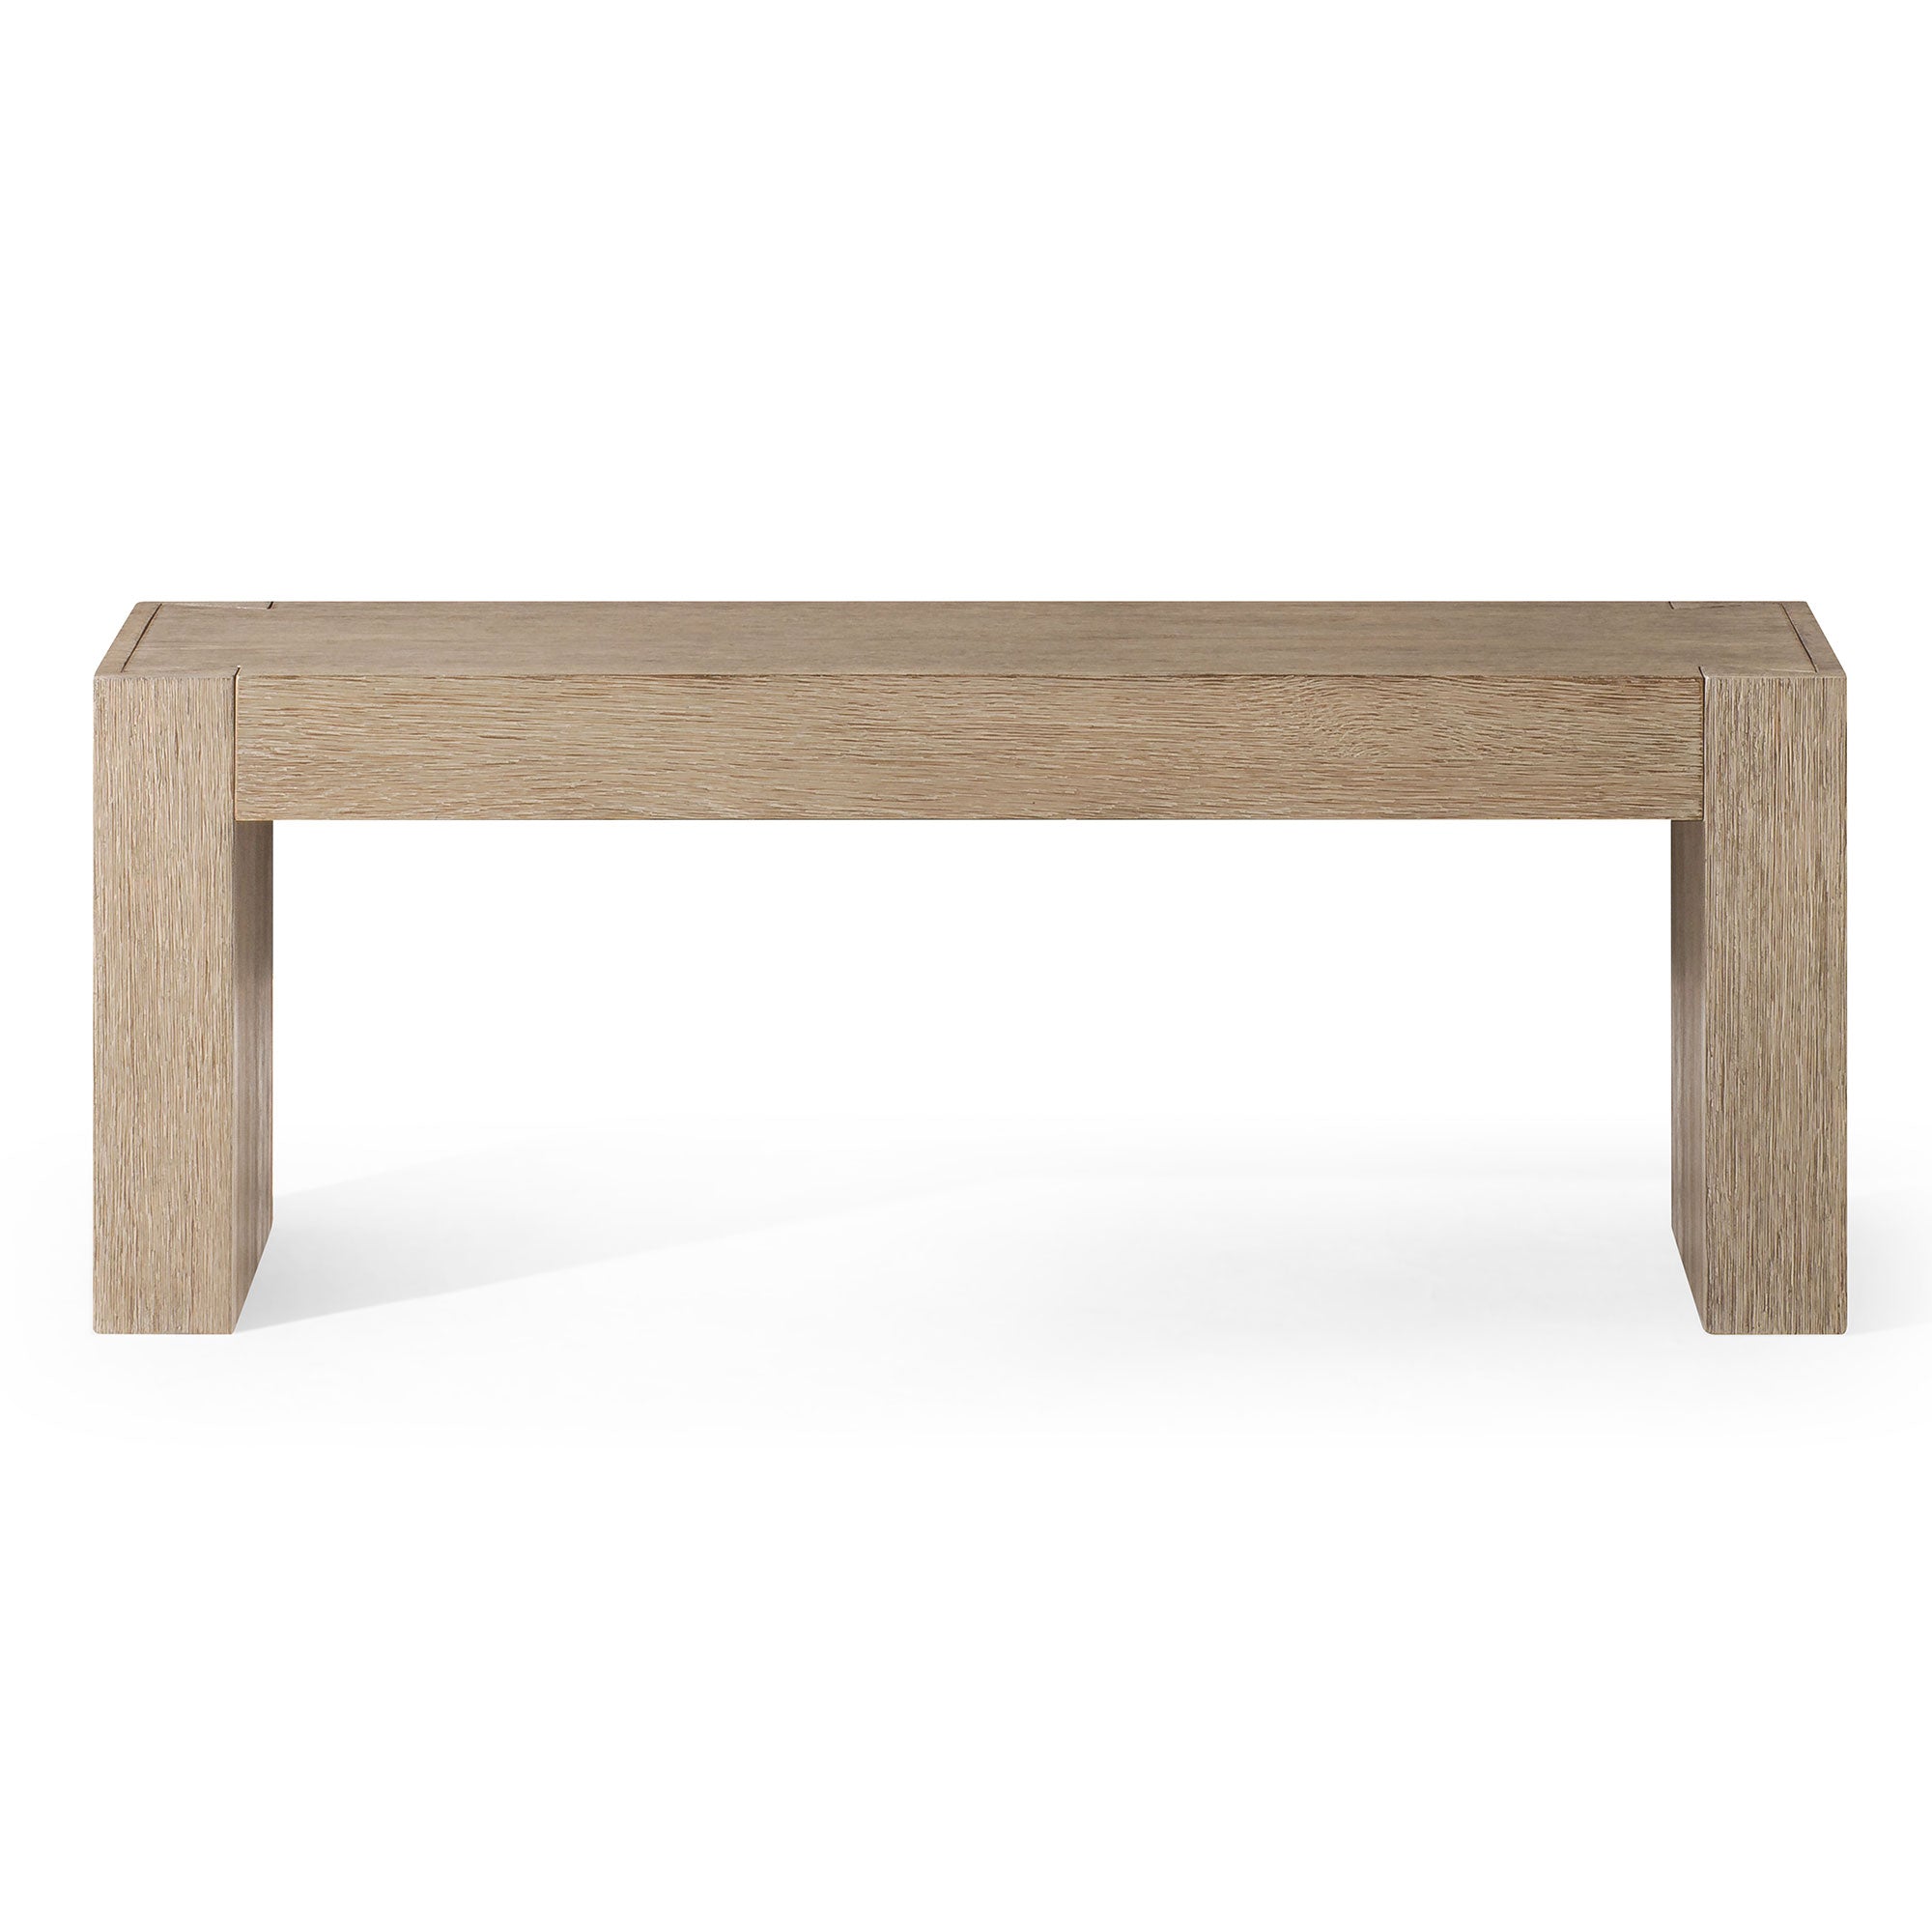 Zeno Organic Wooden Bench in Weathered Grey Finish in Ottomans & Benches by Maven Lane